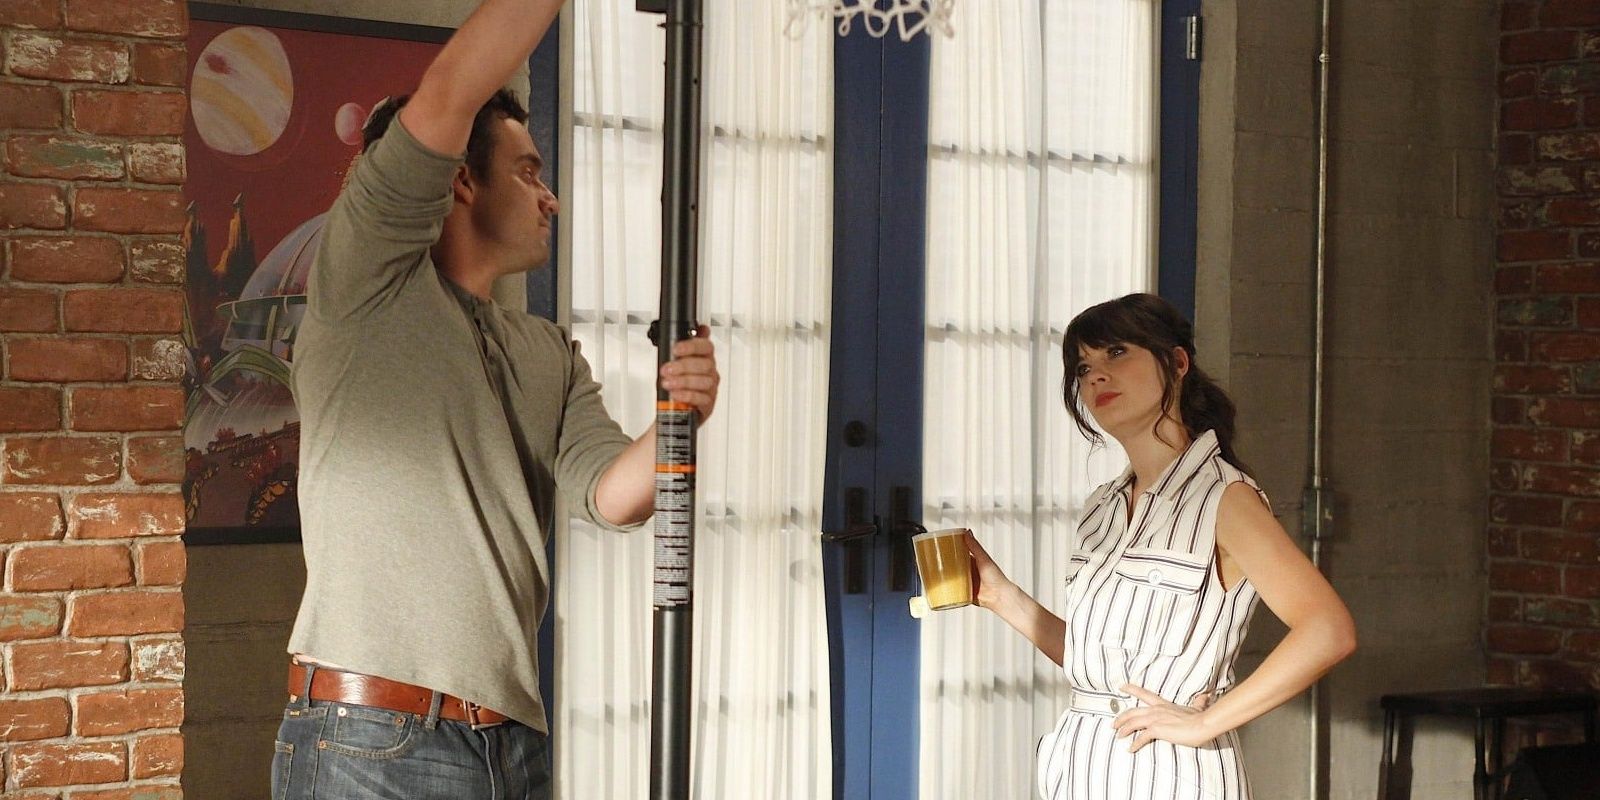 Nick pushing a basketball hoop, and jess standing with a cup of tea